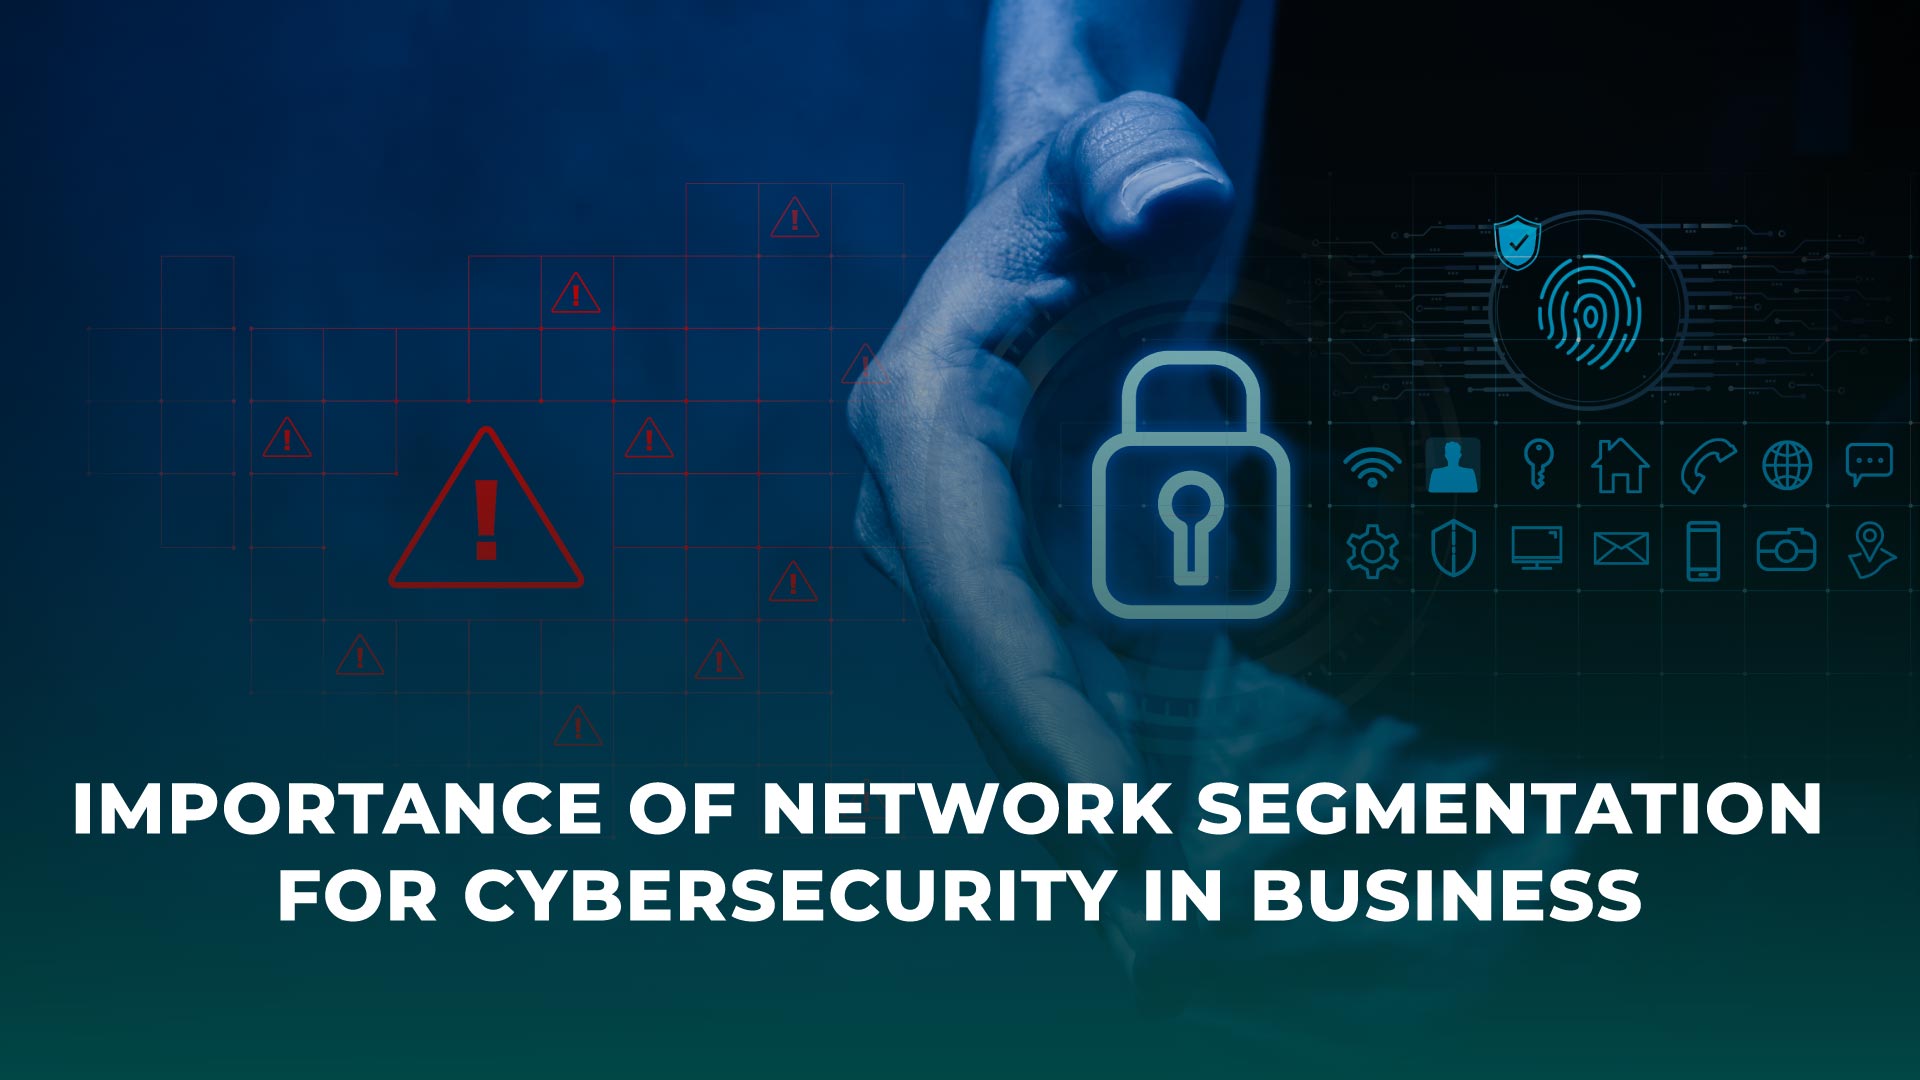 Importance of Network Segmentation for Cybersecurity in Business